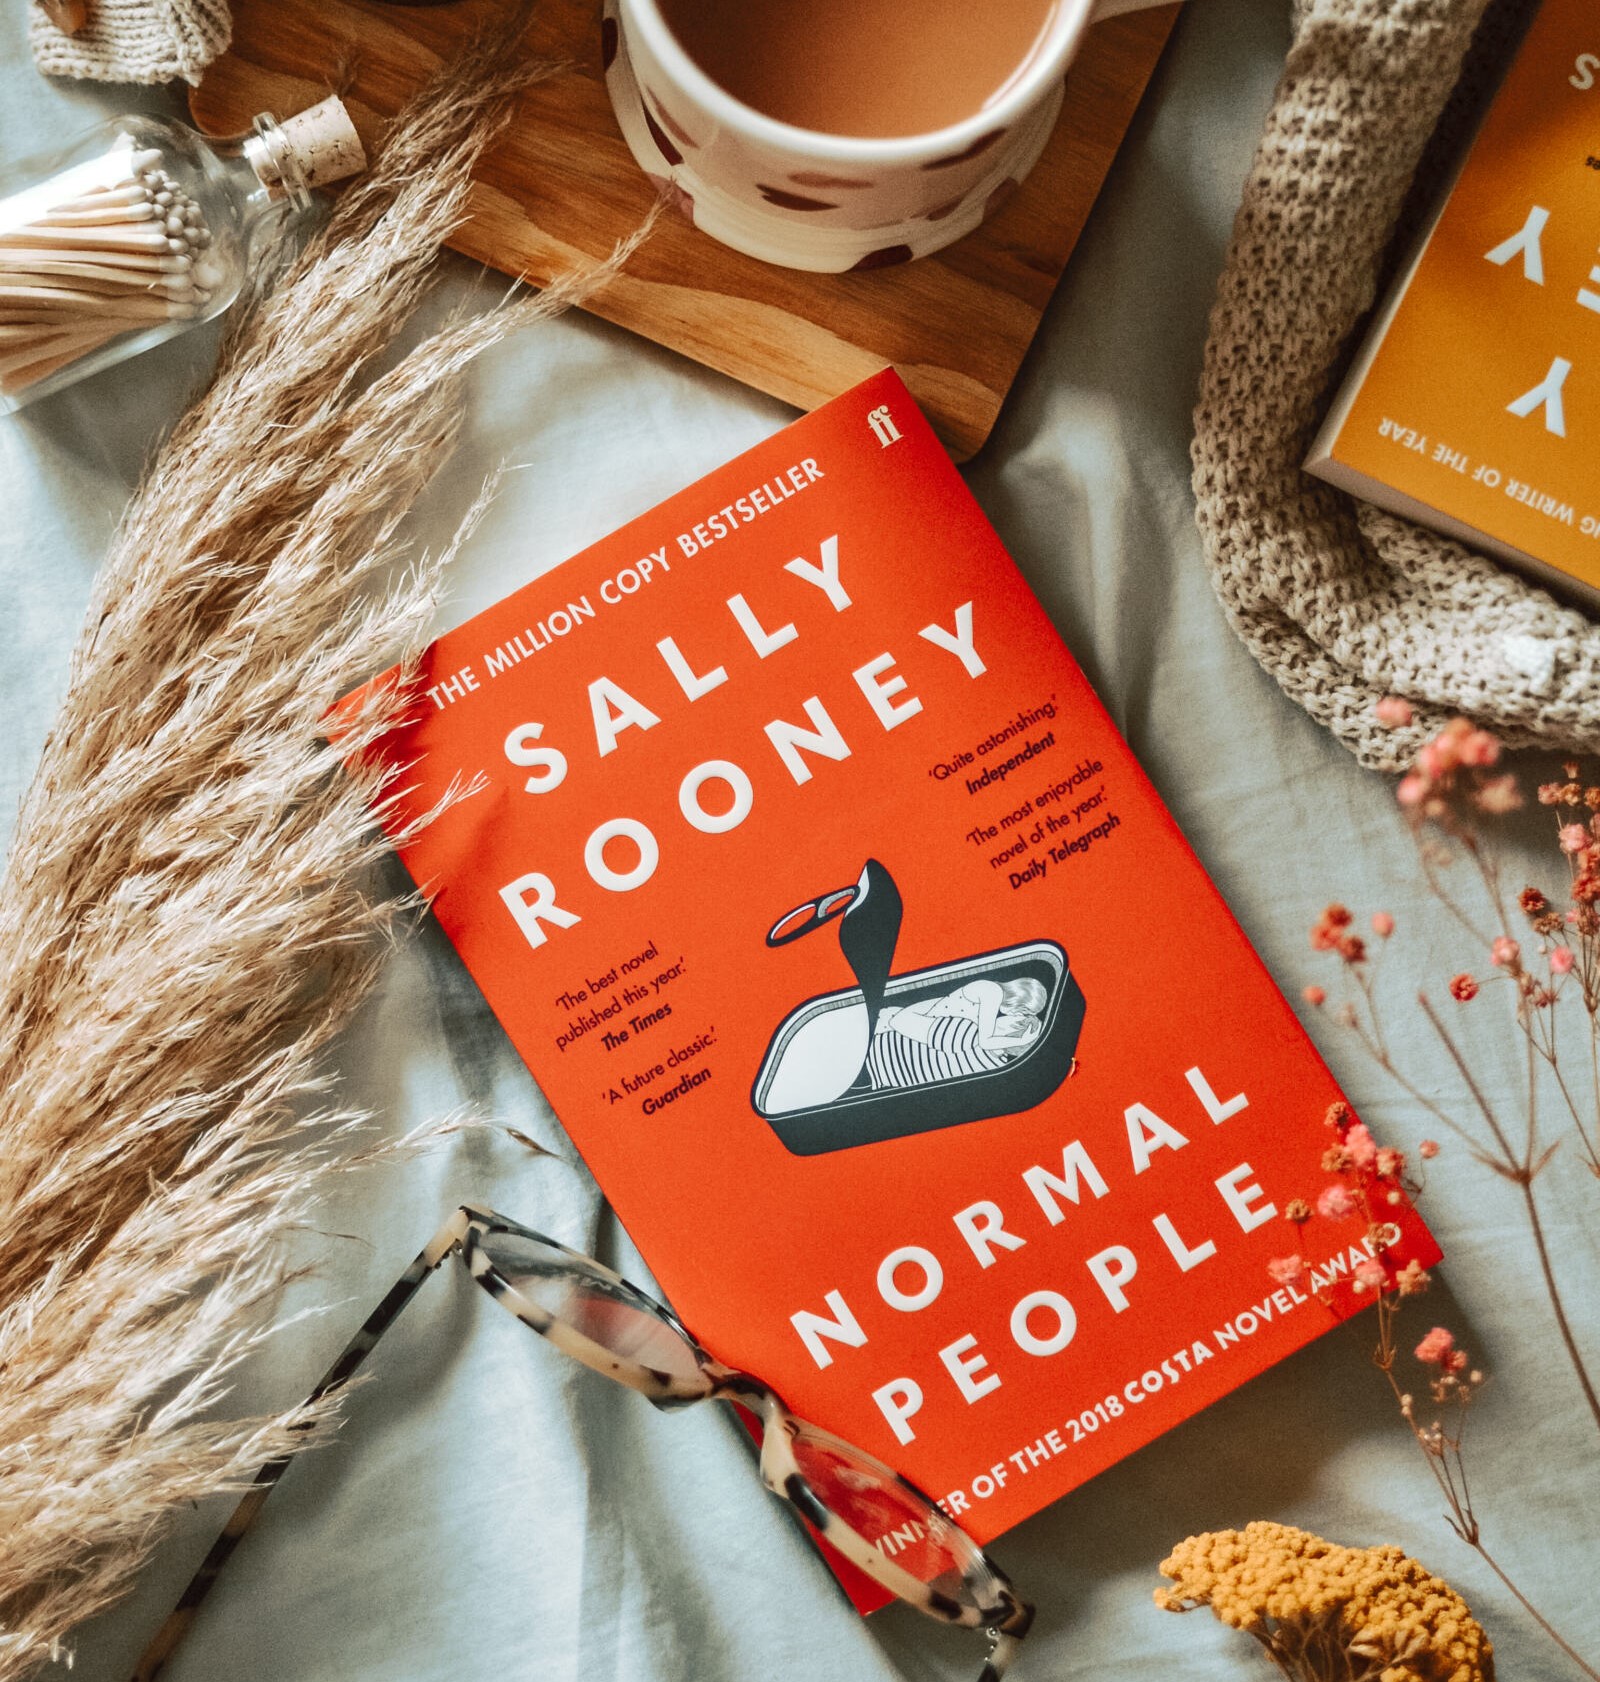 normal people one million copies sold sally rooney